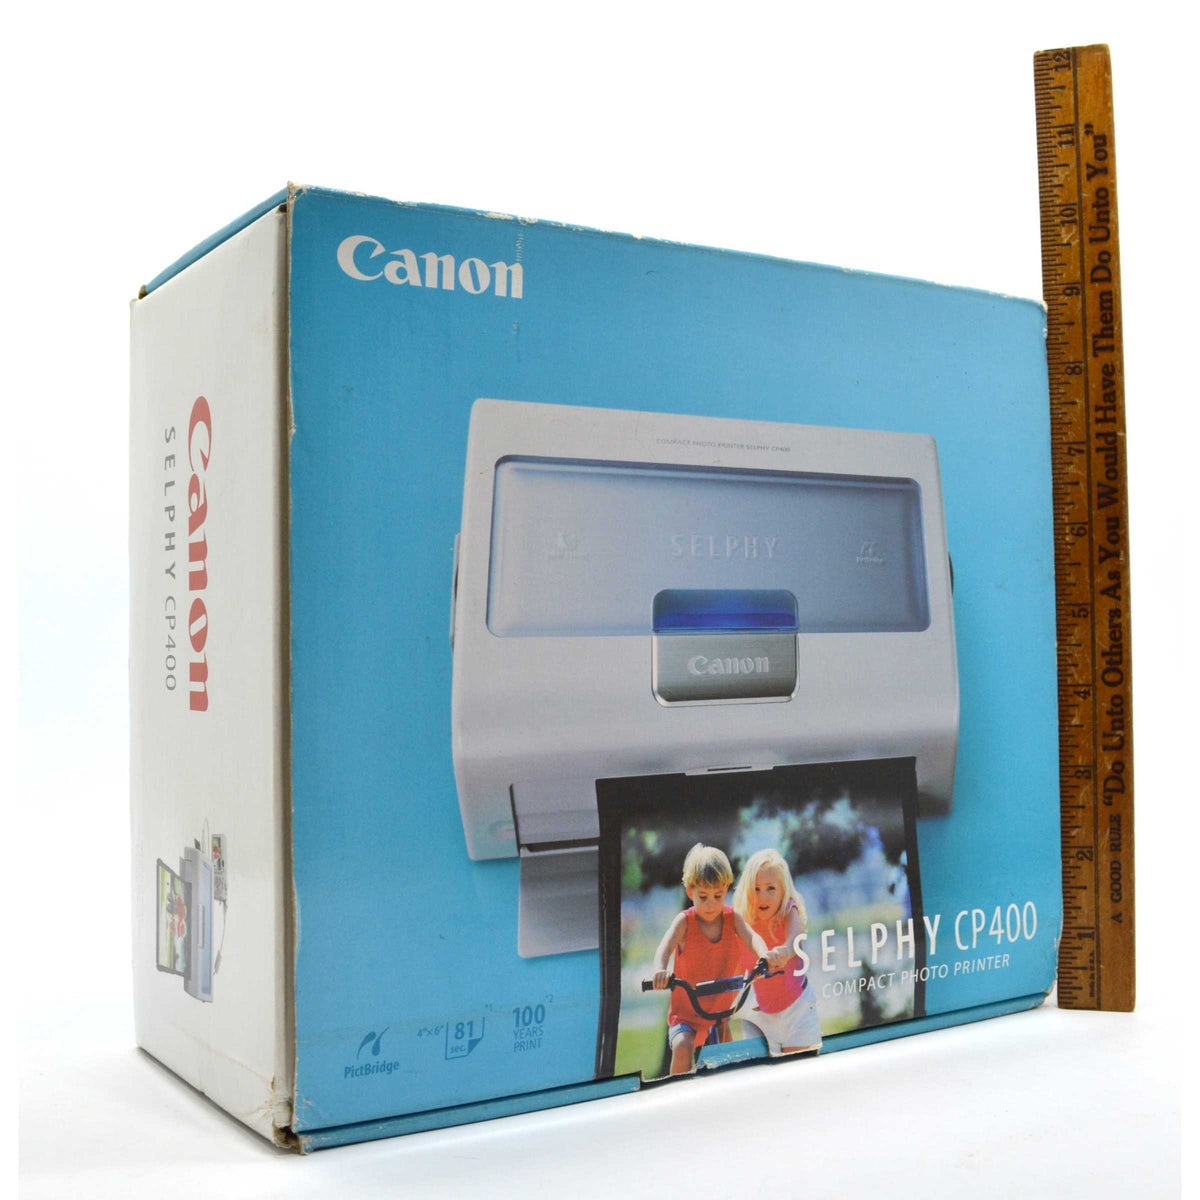 New in Open Box CANON SELPHY PHOTO PRINTER #CP400 Never Used! – Get A Grip & More